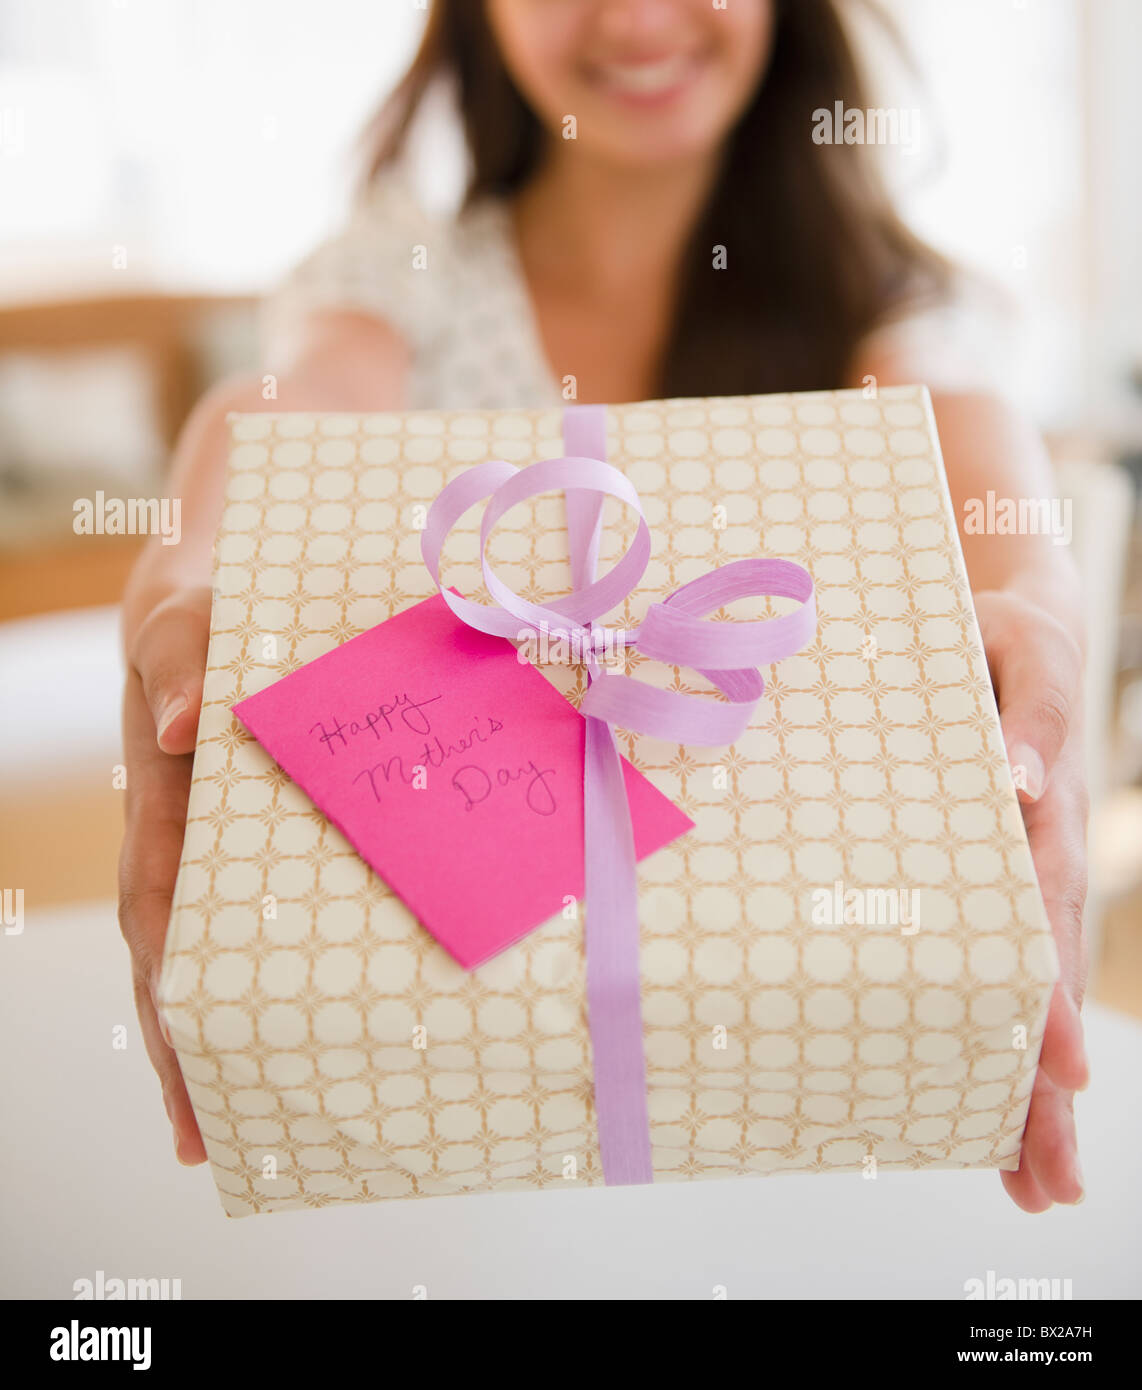 Indian woman holding out Mother's Day gift Stock Photo